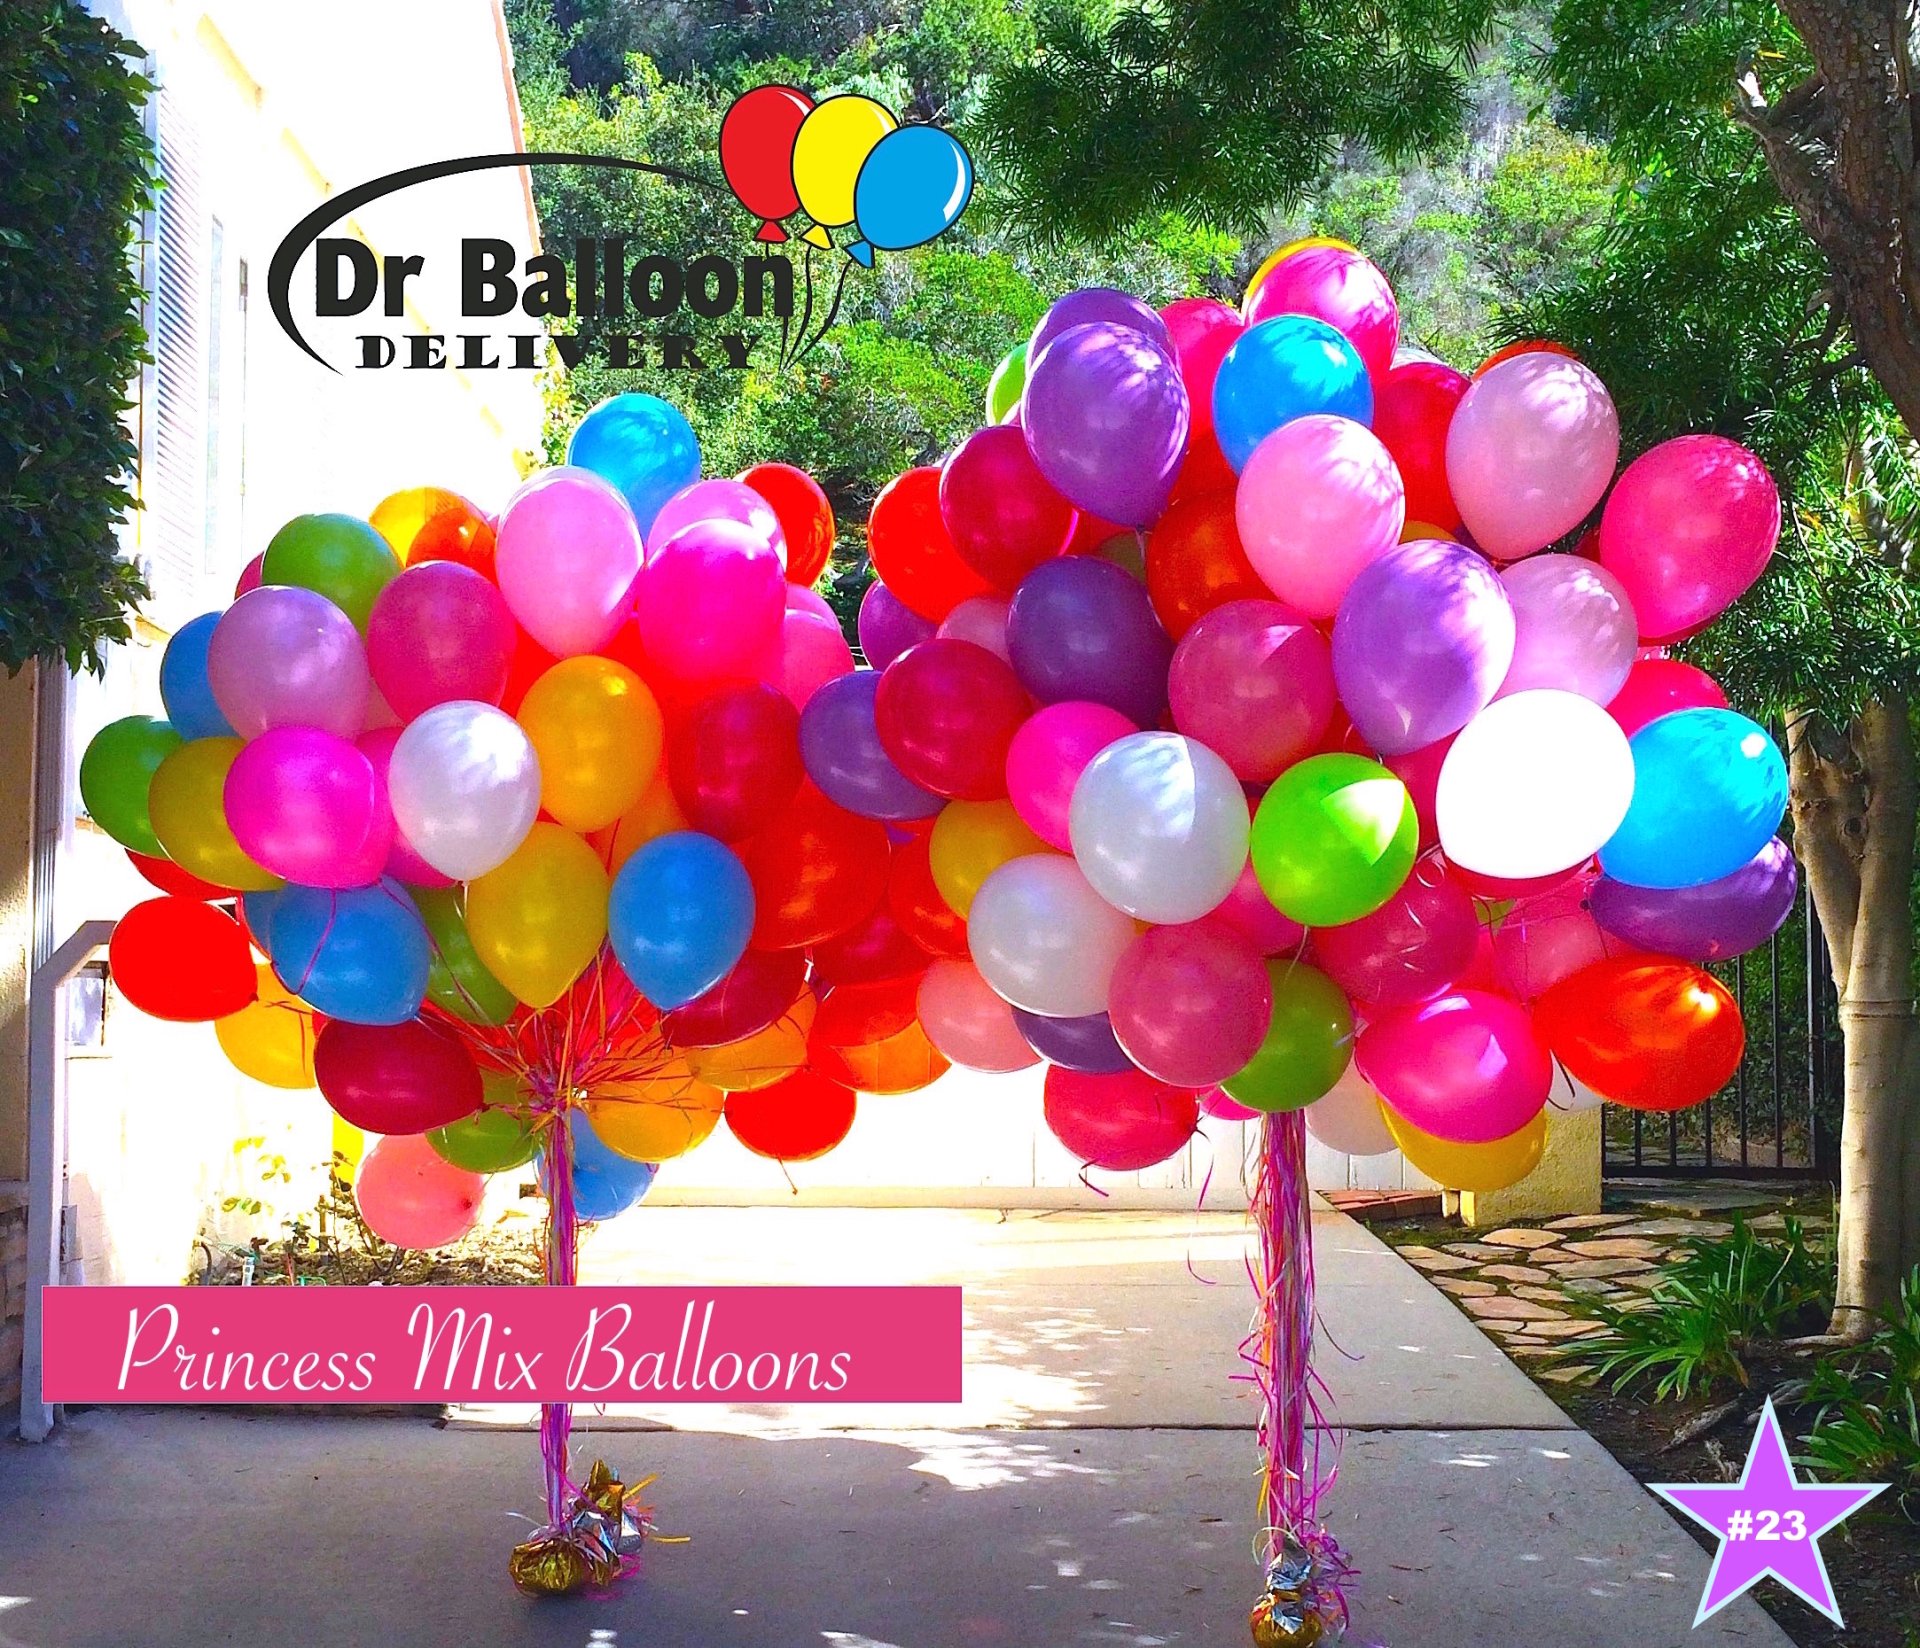 Lyrisch langs moord Pacific Palisades Balloon Store - Balloon Delivery - Balloons & Delivery CA